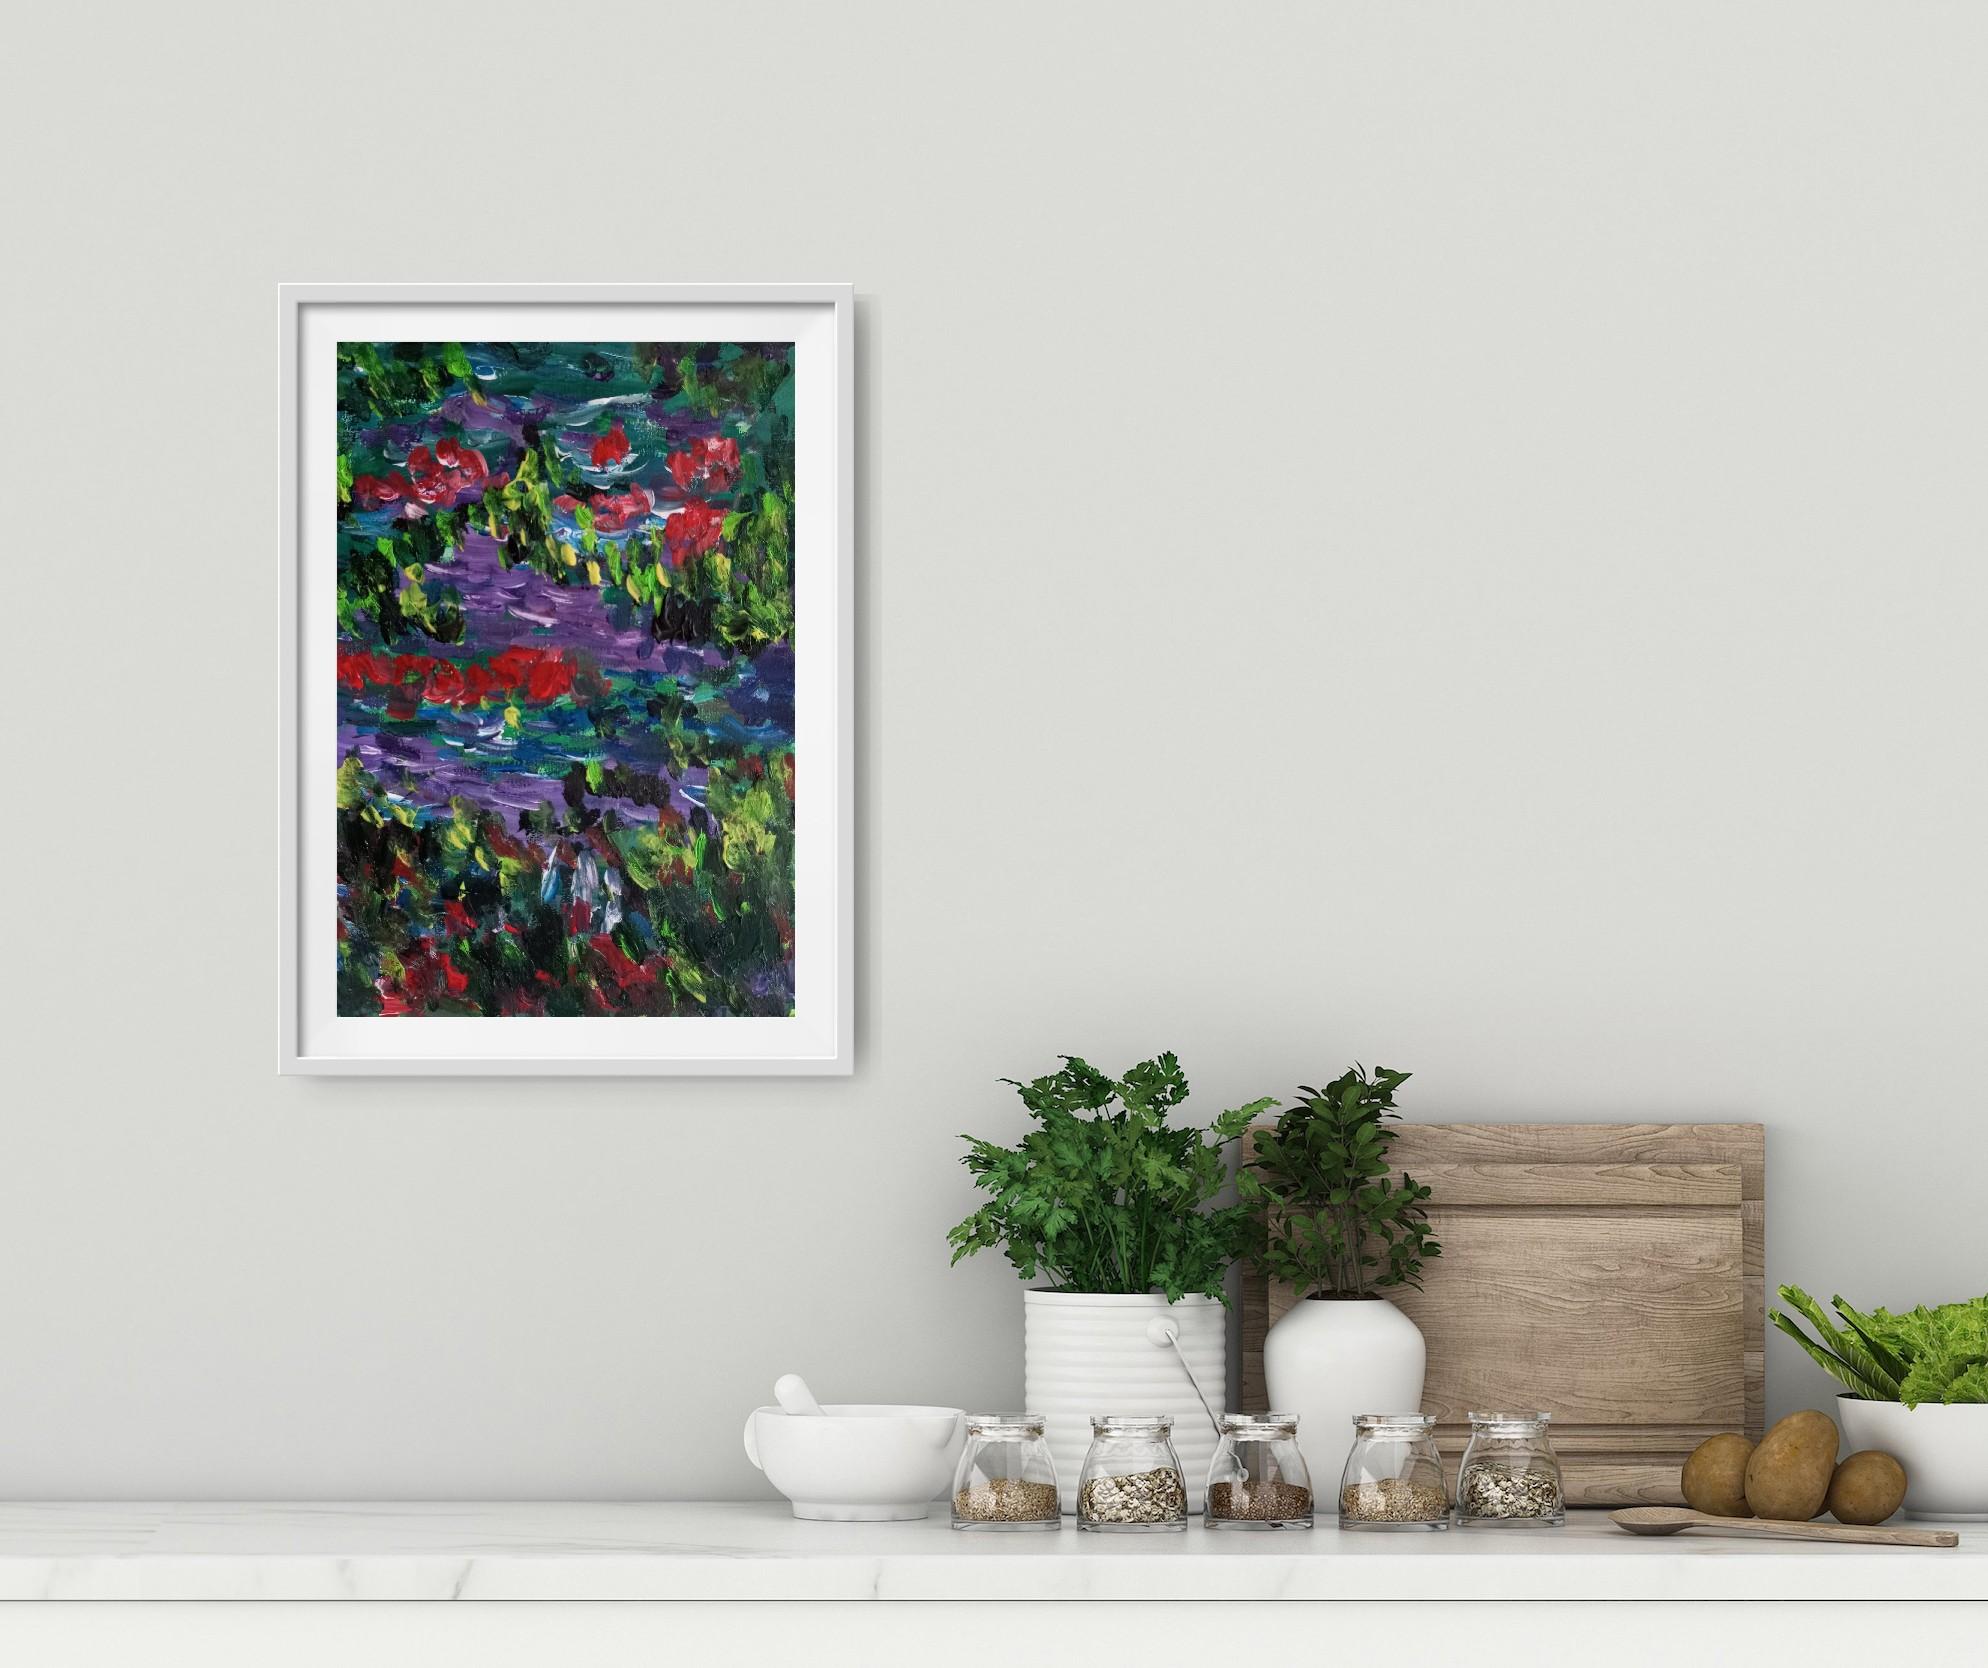 
In my art practice I love to use bright colors which boldly contrast with complementary colors so I could get unusual original compositions and structures.

The objective of this artpiece was to capture the beauty of nature by using vibrant color